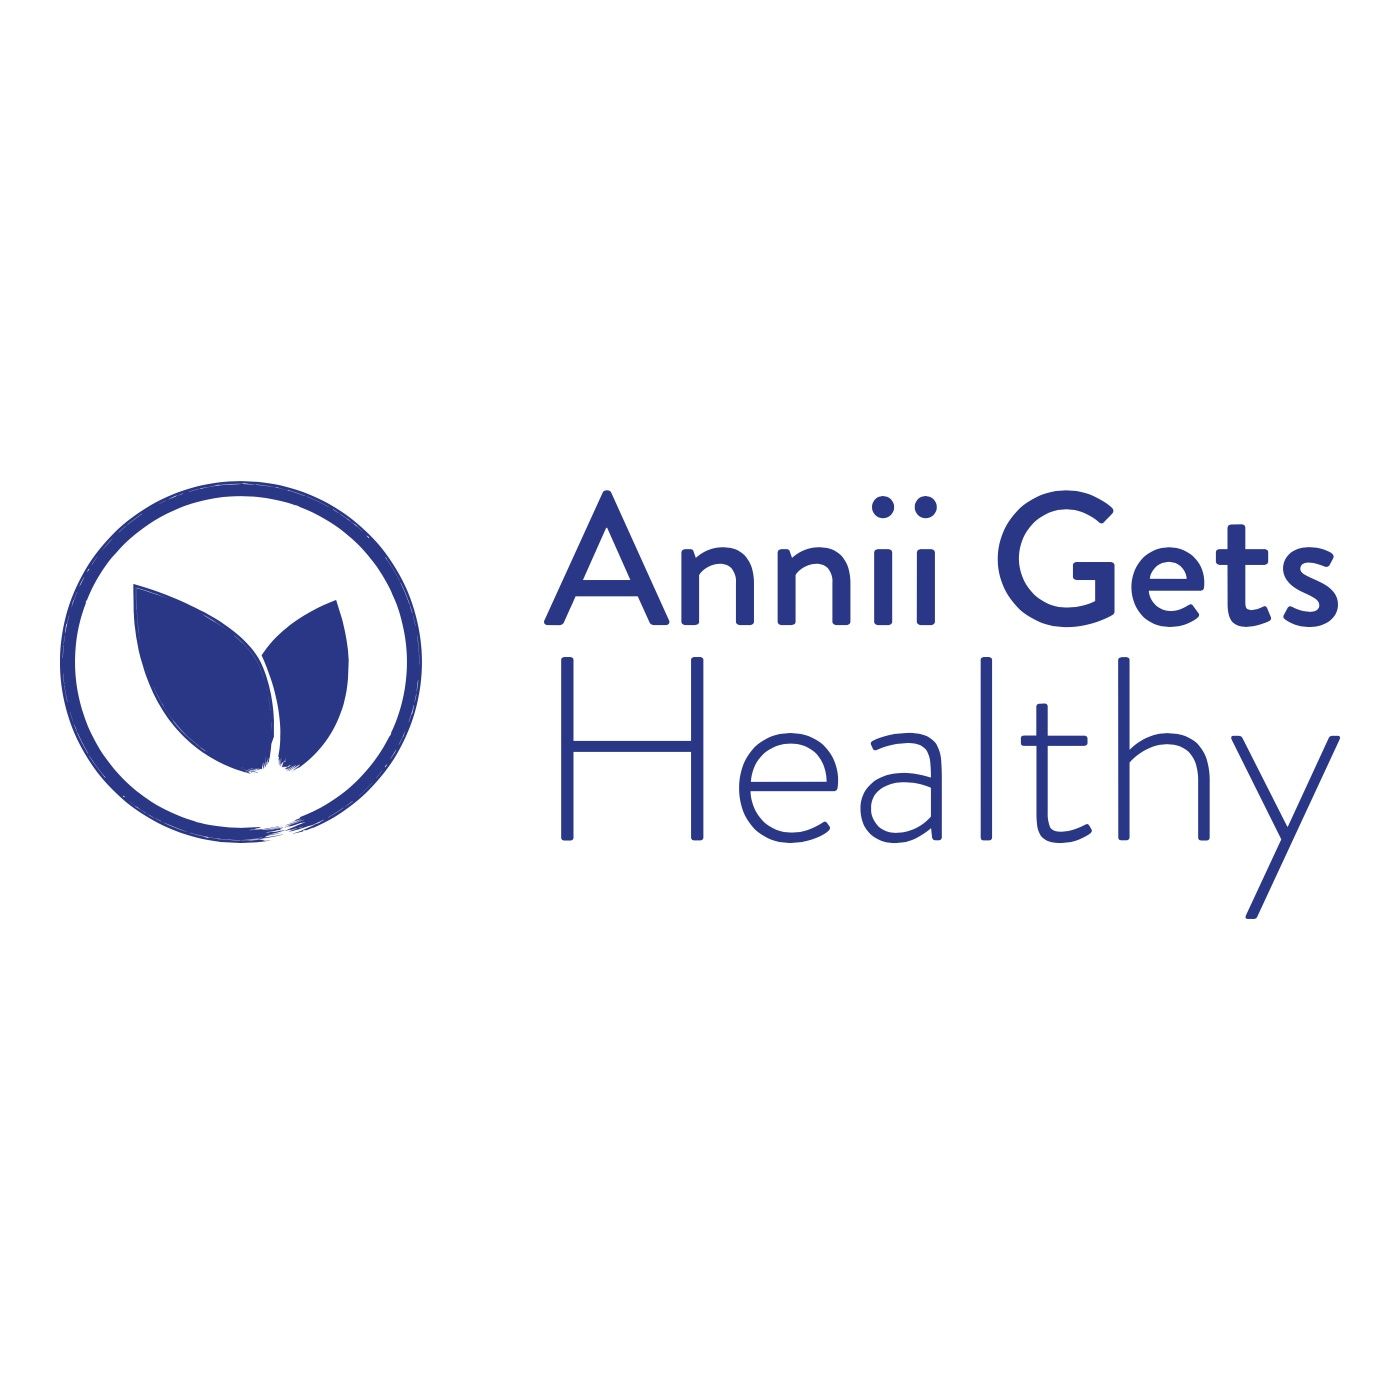 Annii Gets Healthy